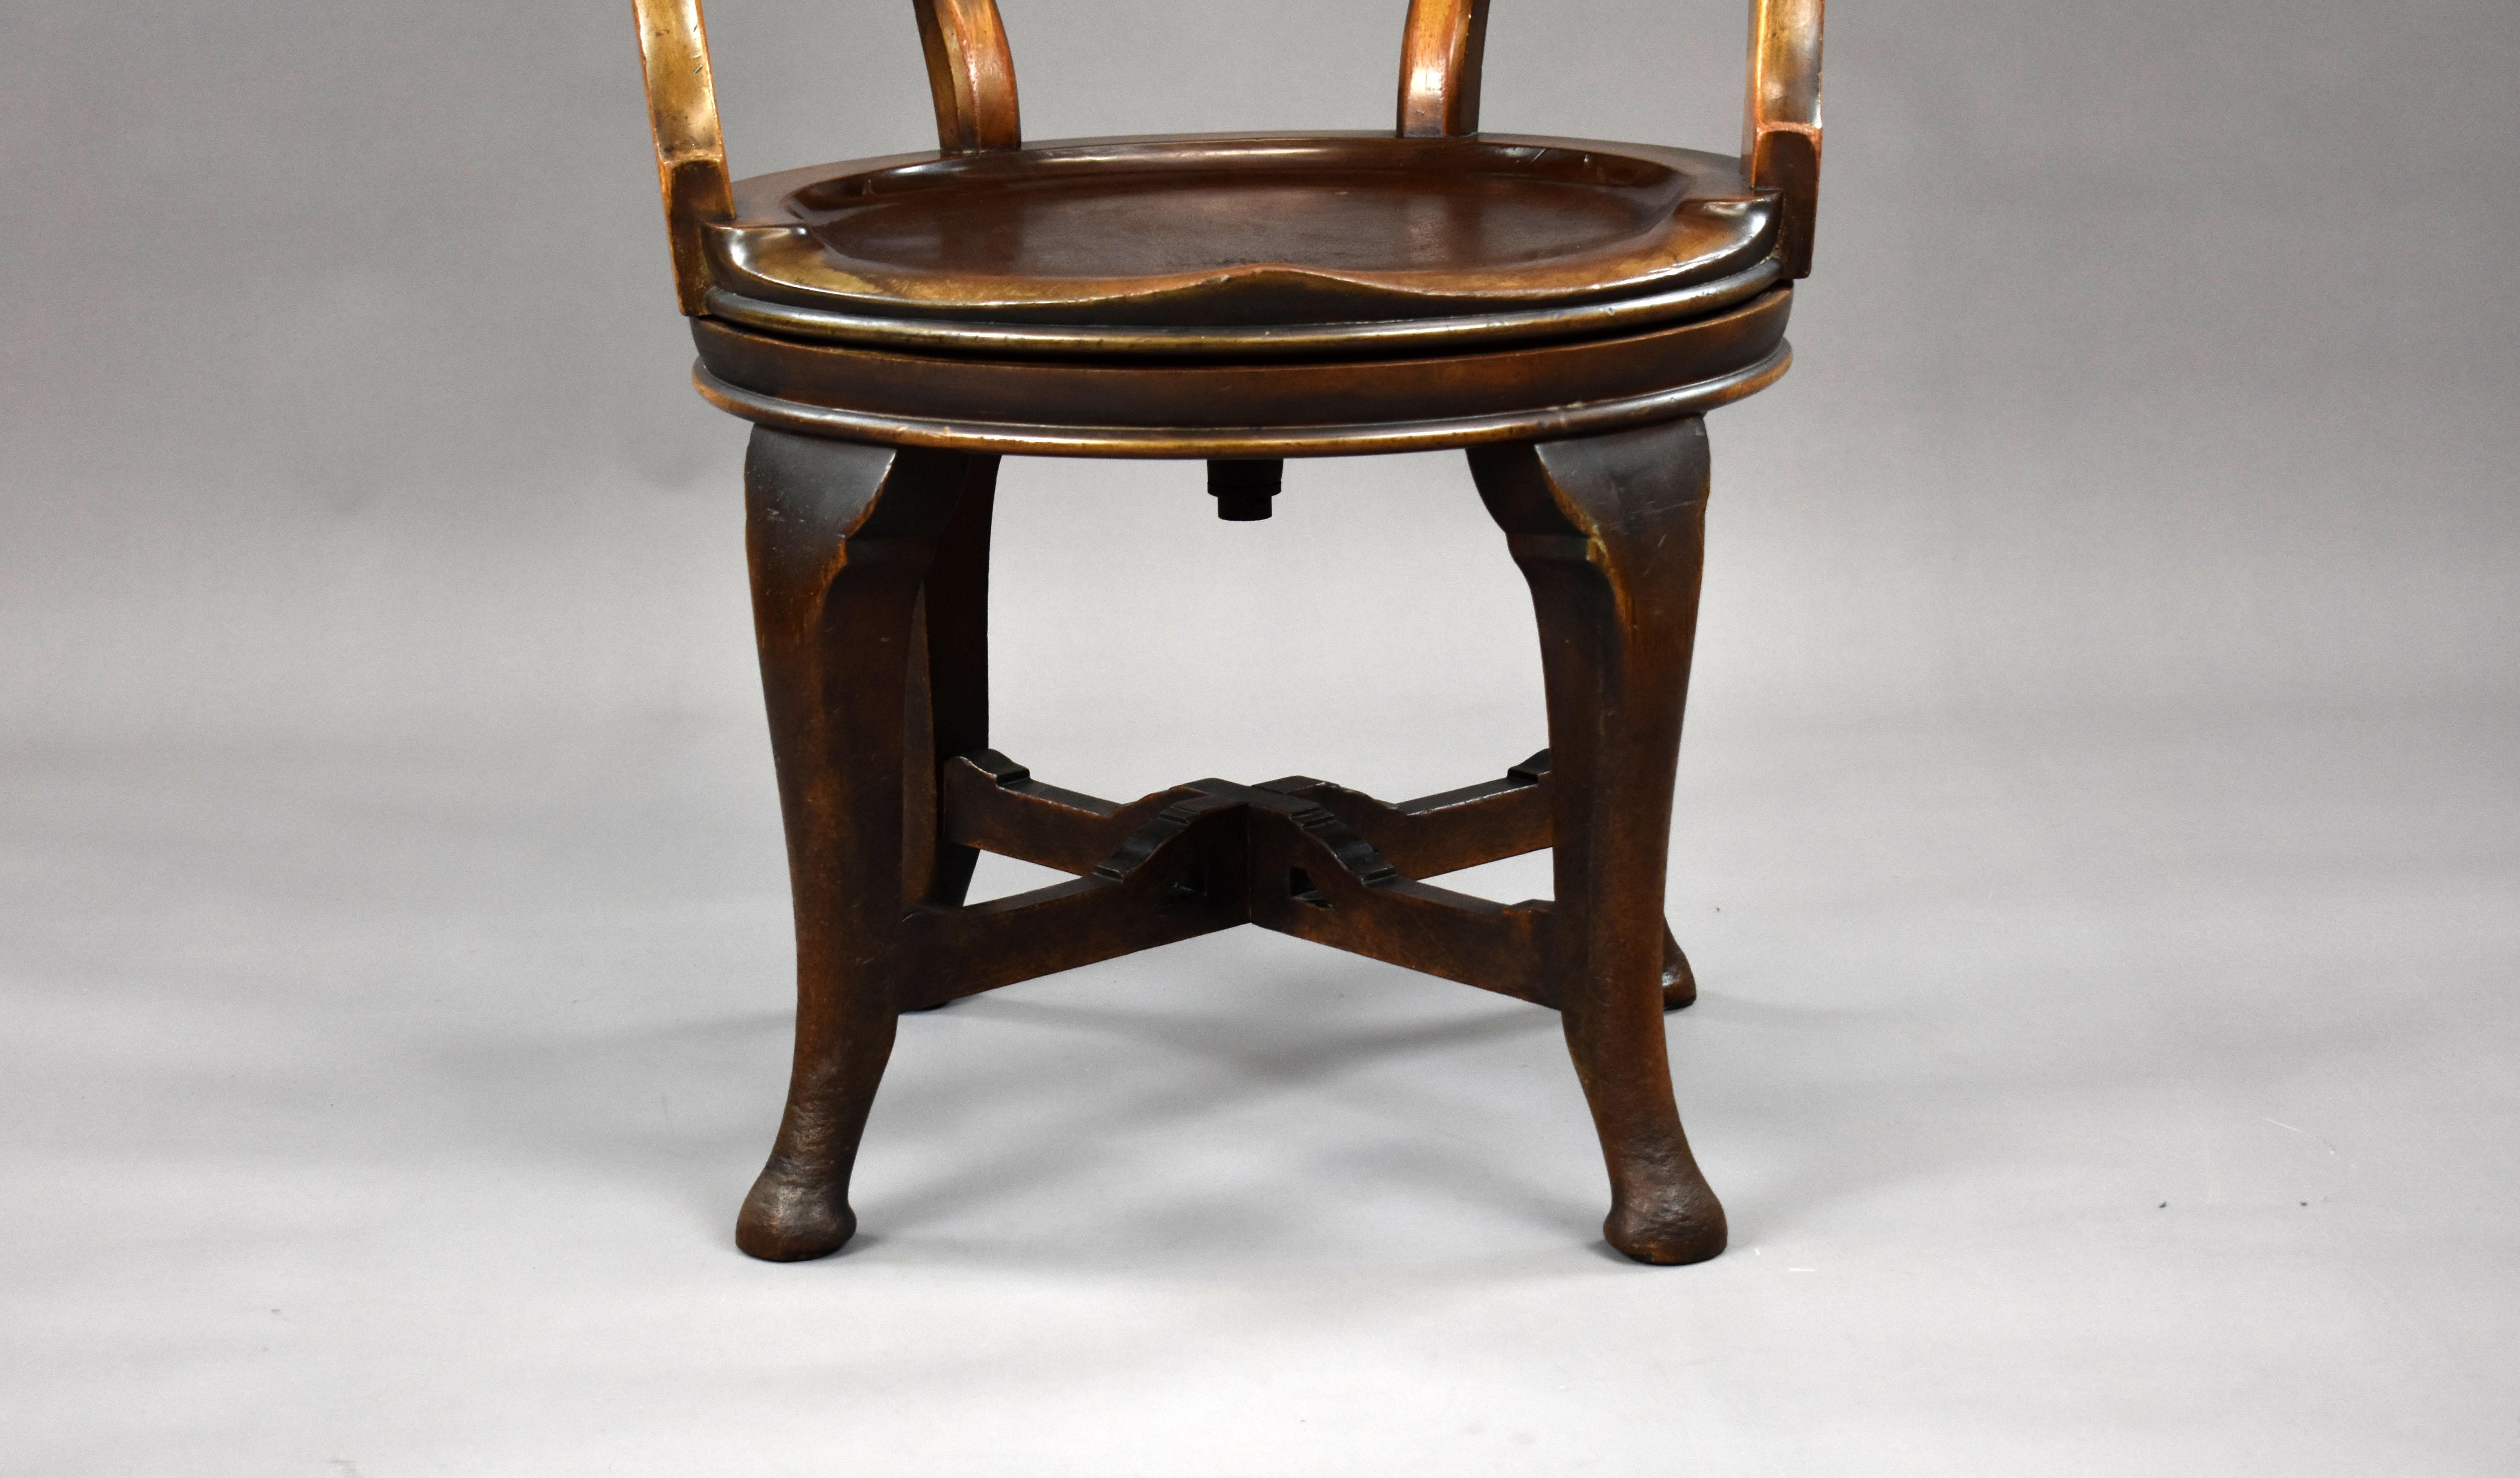 Edwardian English Mahogany Desk Chair In Good Condition For Sale In Chelmsford, Essex